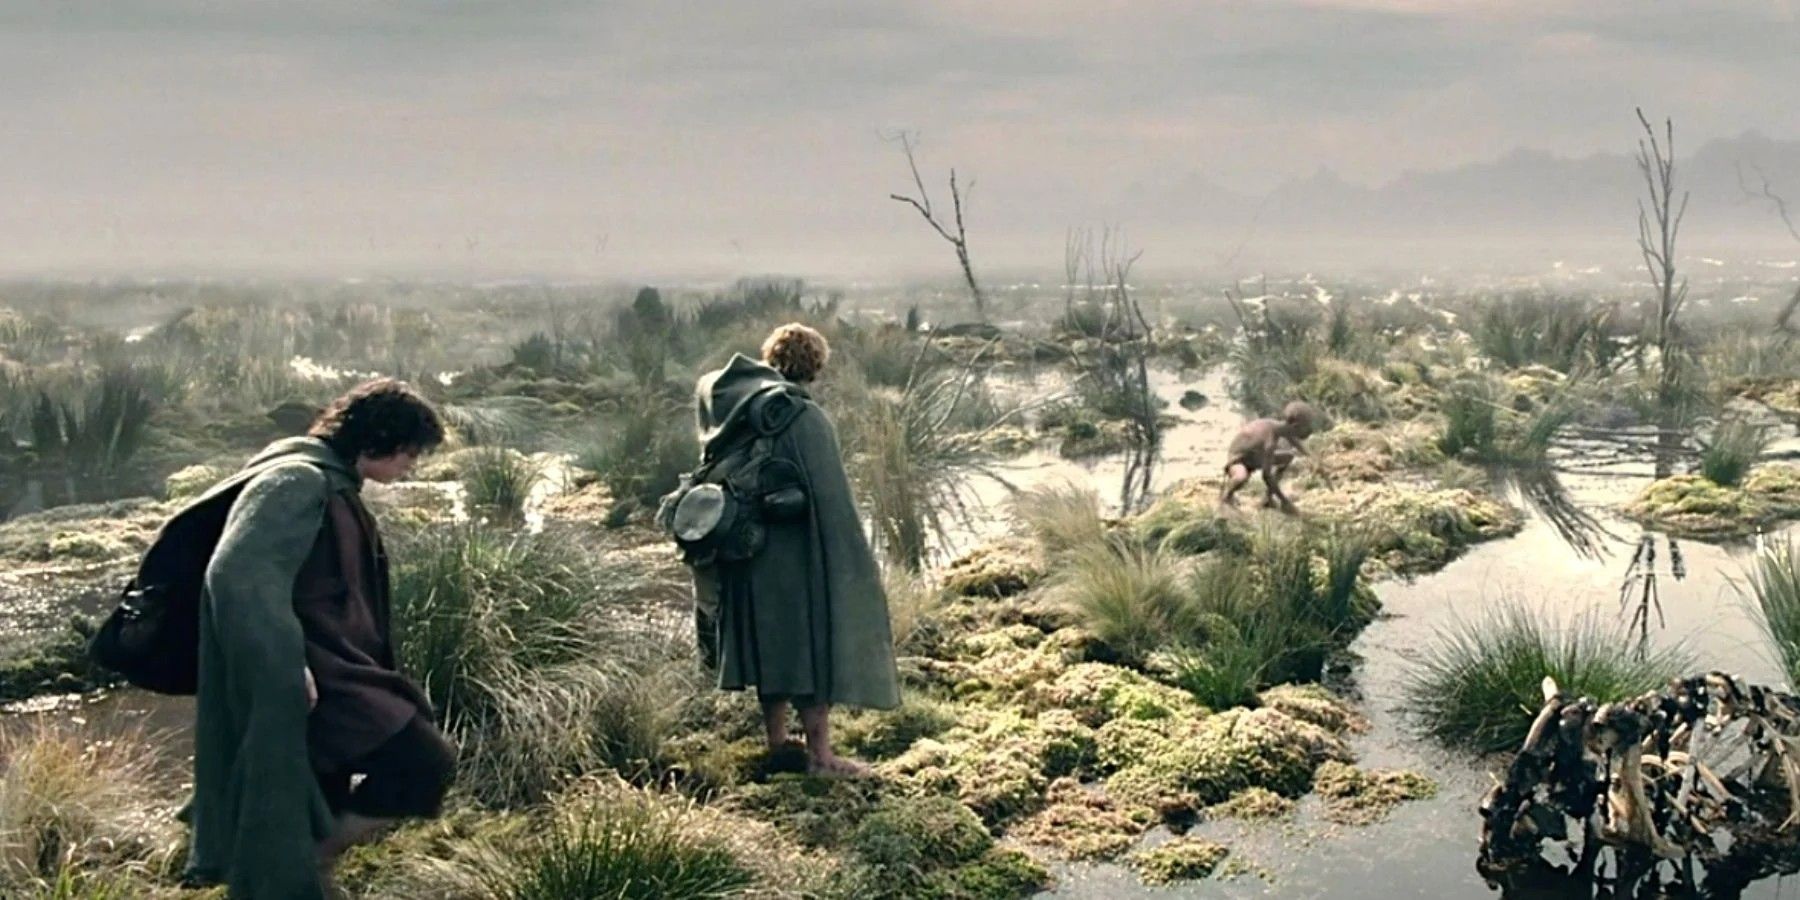 Frodo, Sam, and Gollum walking through the Dead Marshes in The Lord of the Rings 